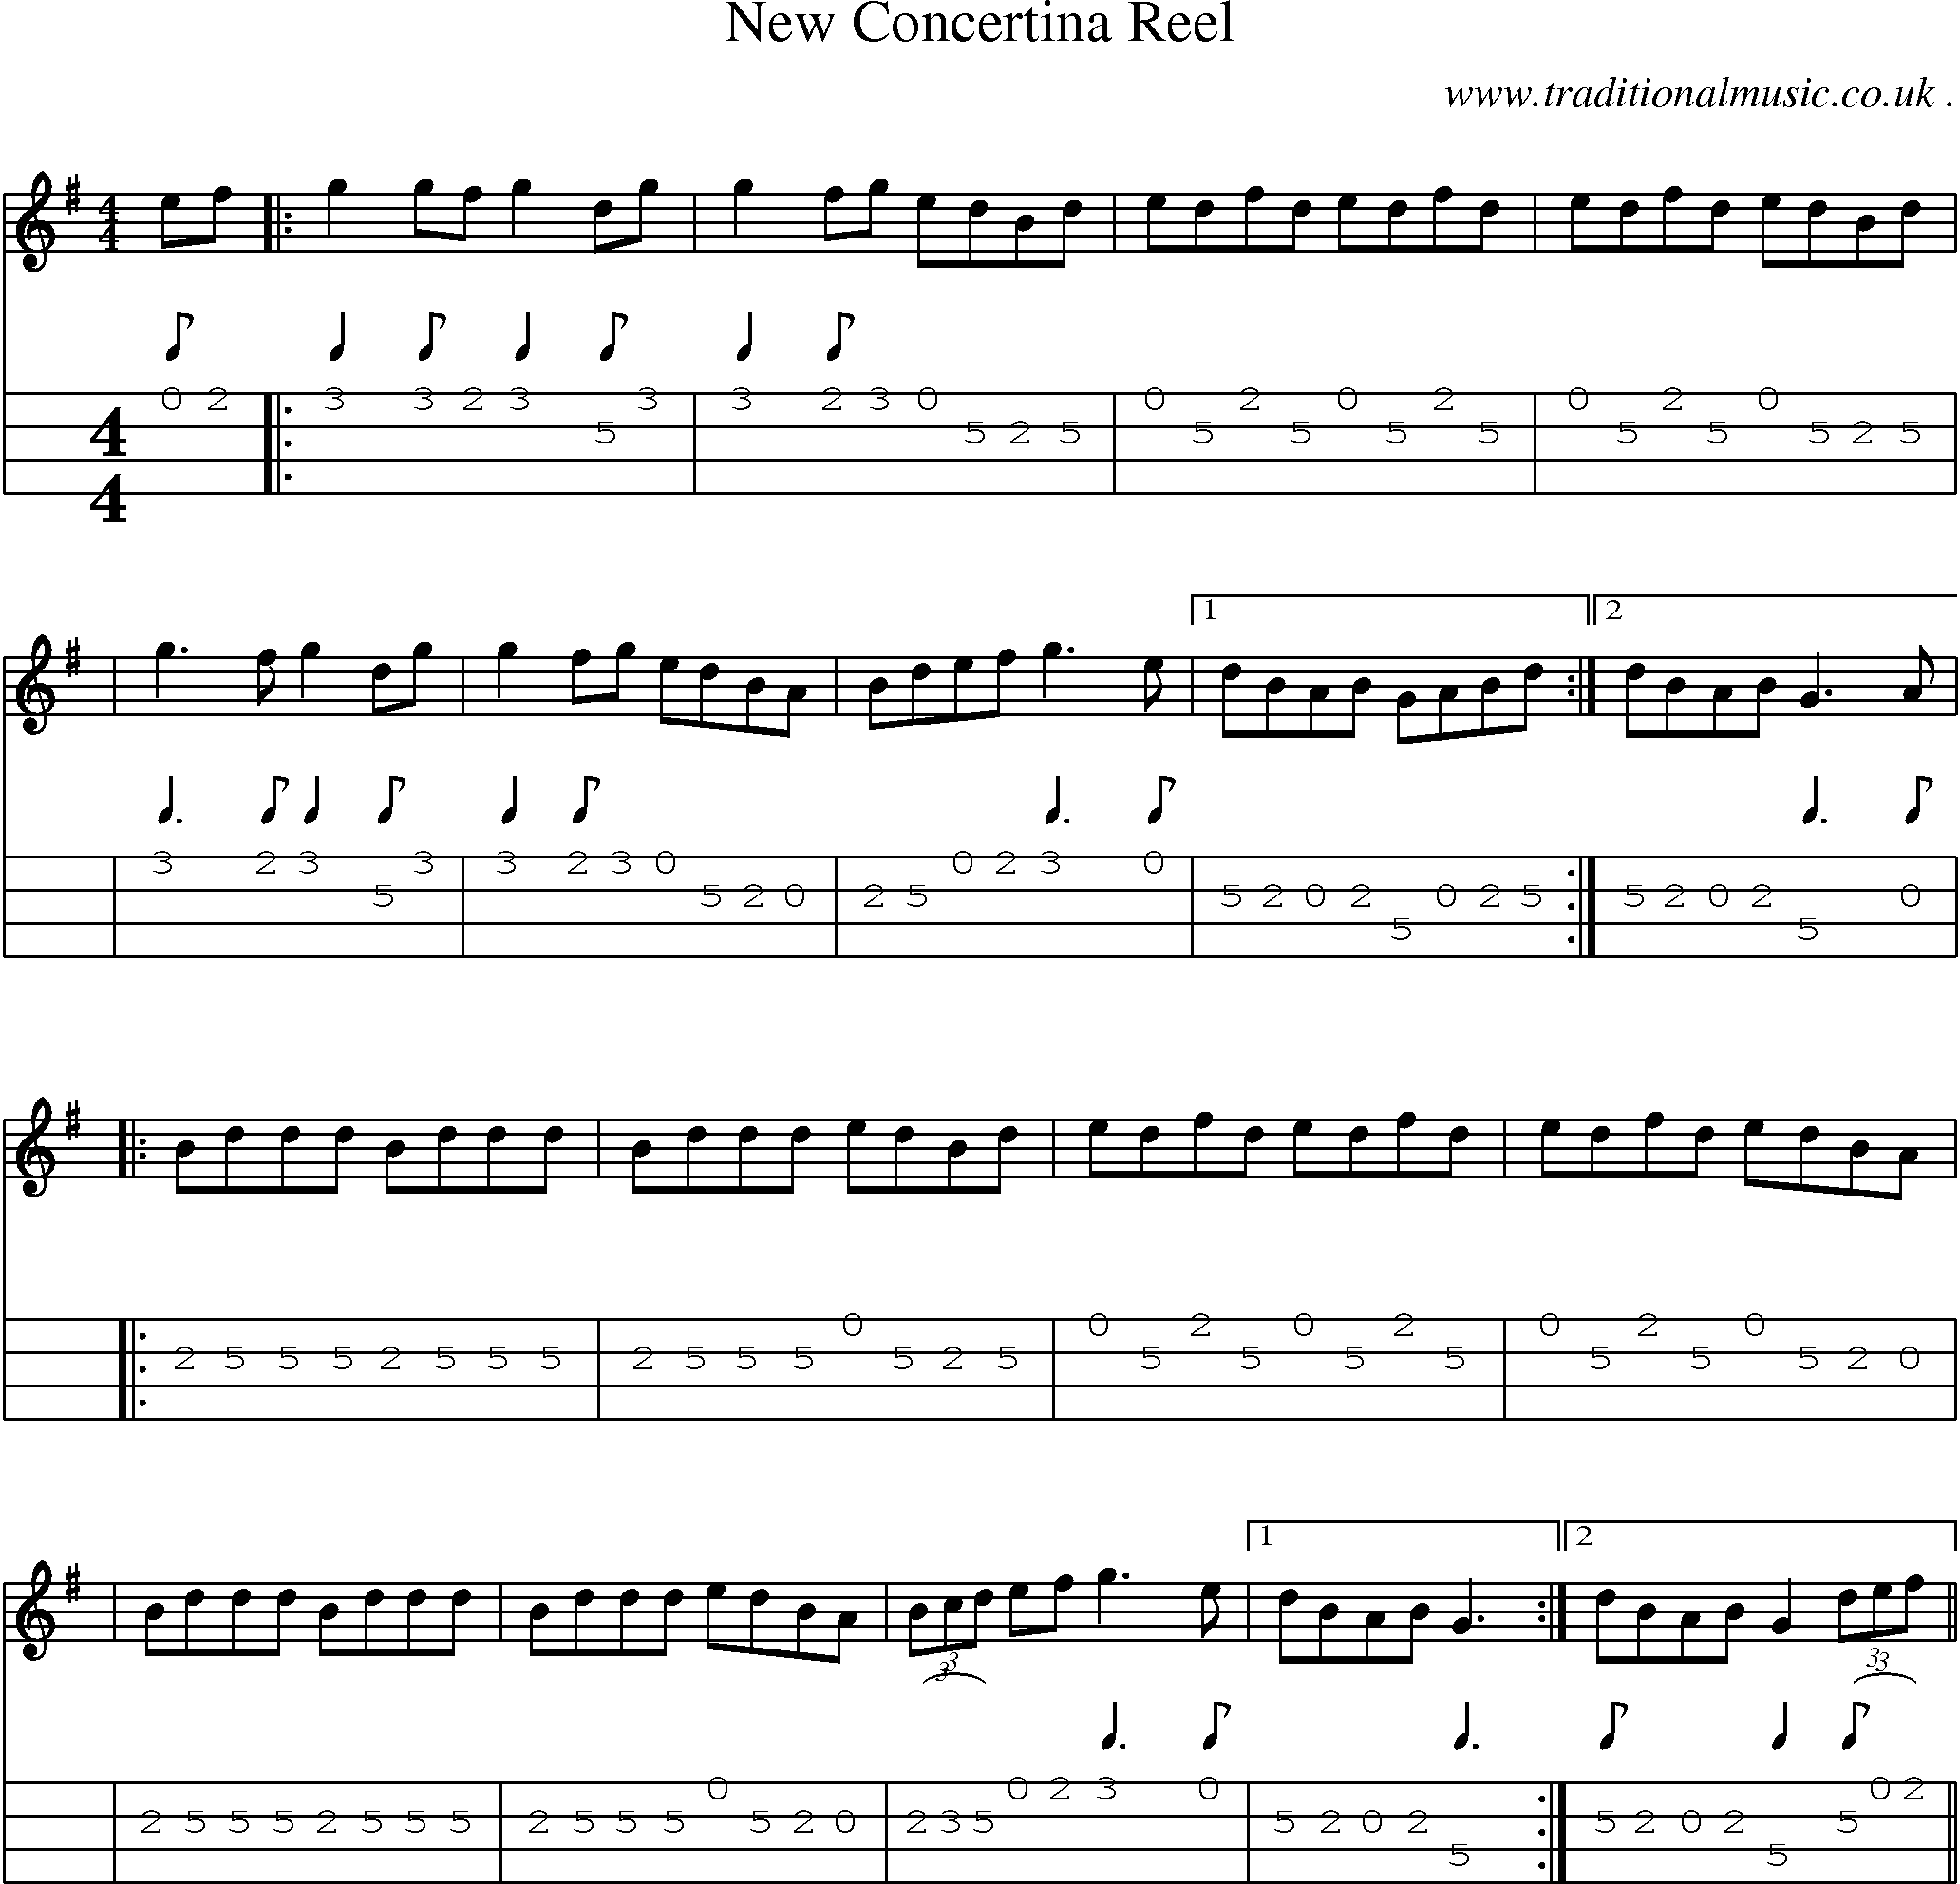 Sheet-Music and Mandolin Tabs for New Concertina Reel